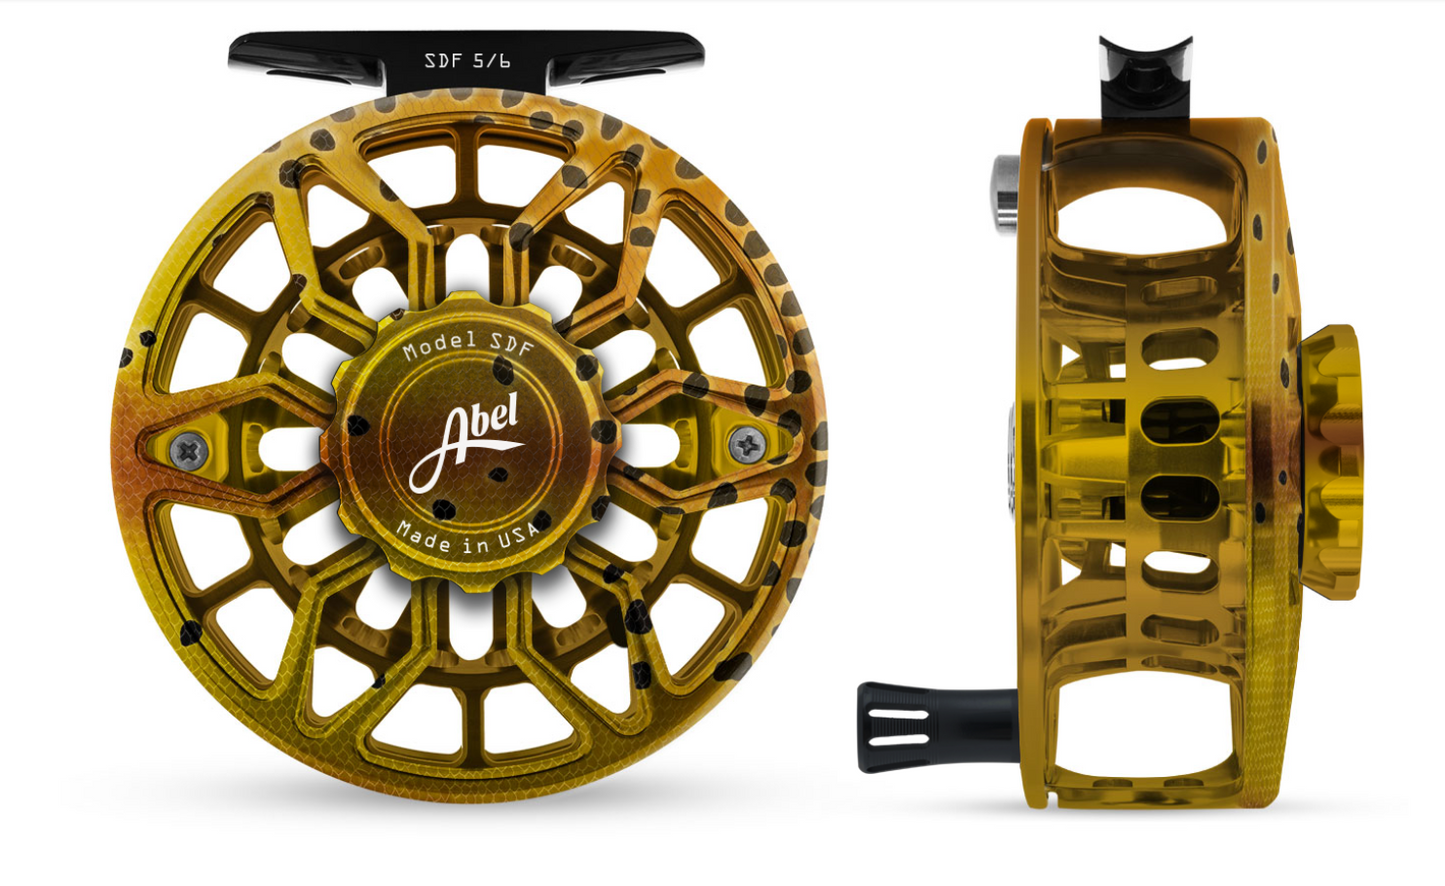 Abel SDF Fly Reel Ported - Native Cutthroat-Cutt Knob 5/6 WT with Blk Handle